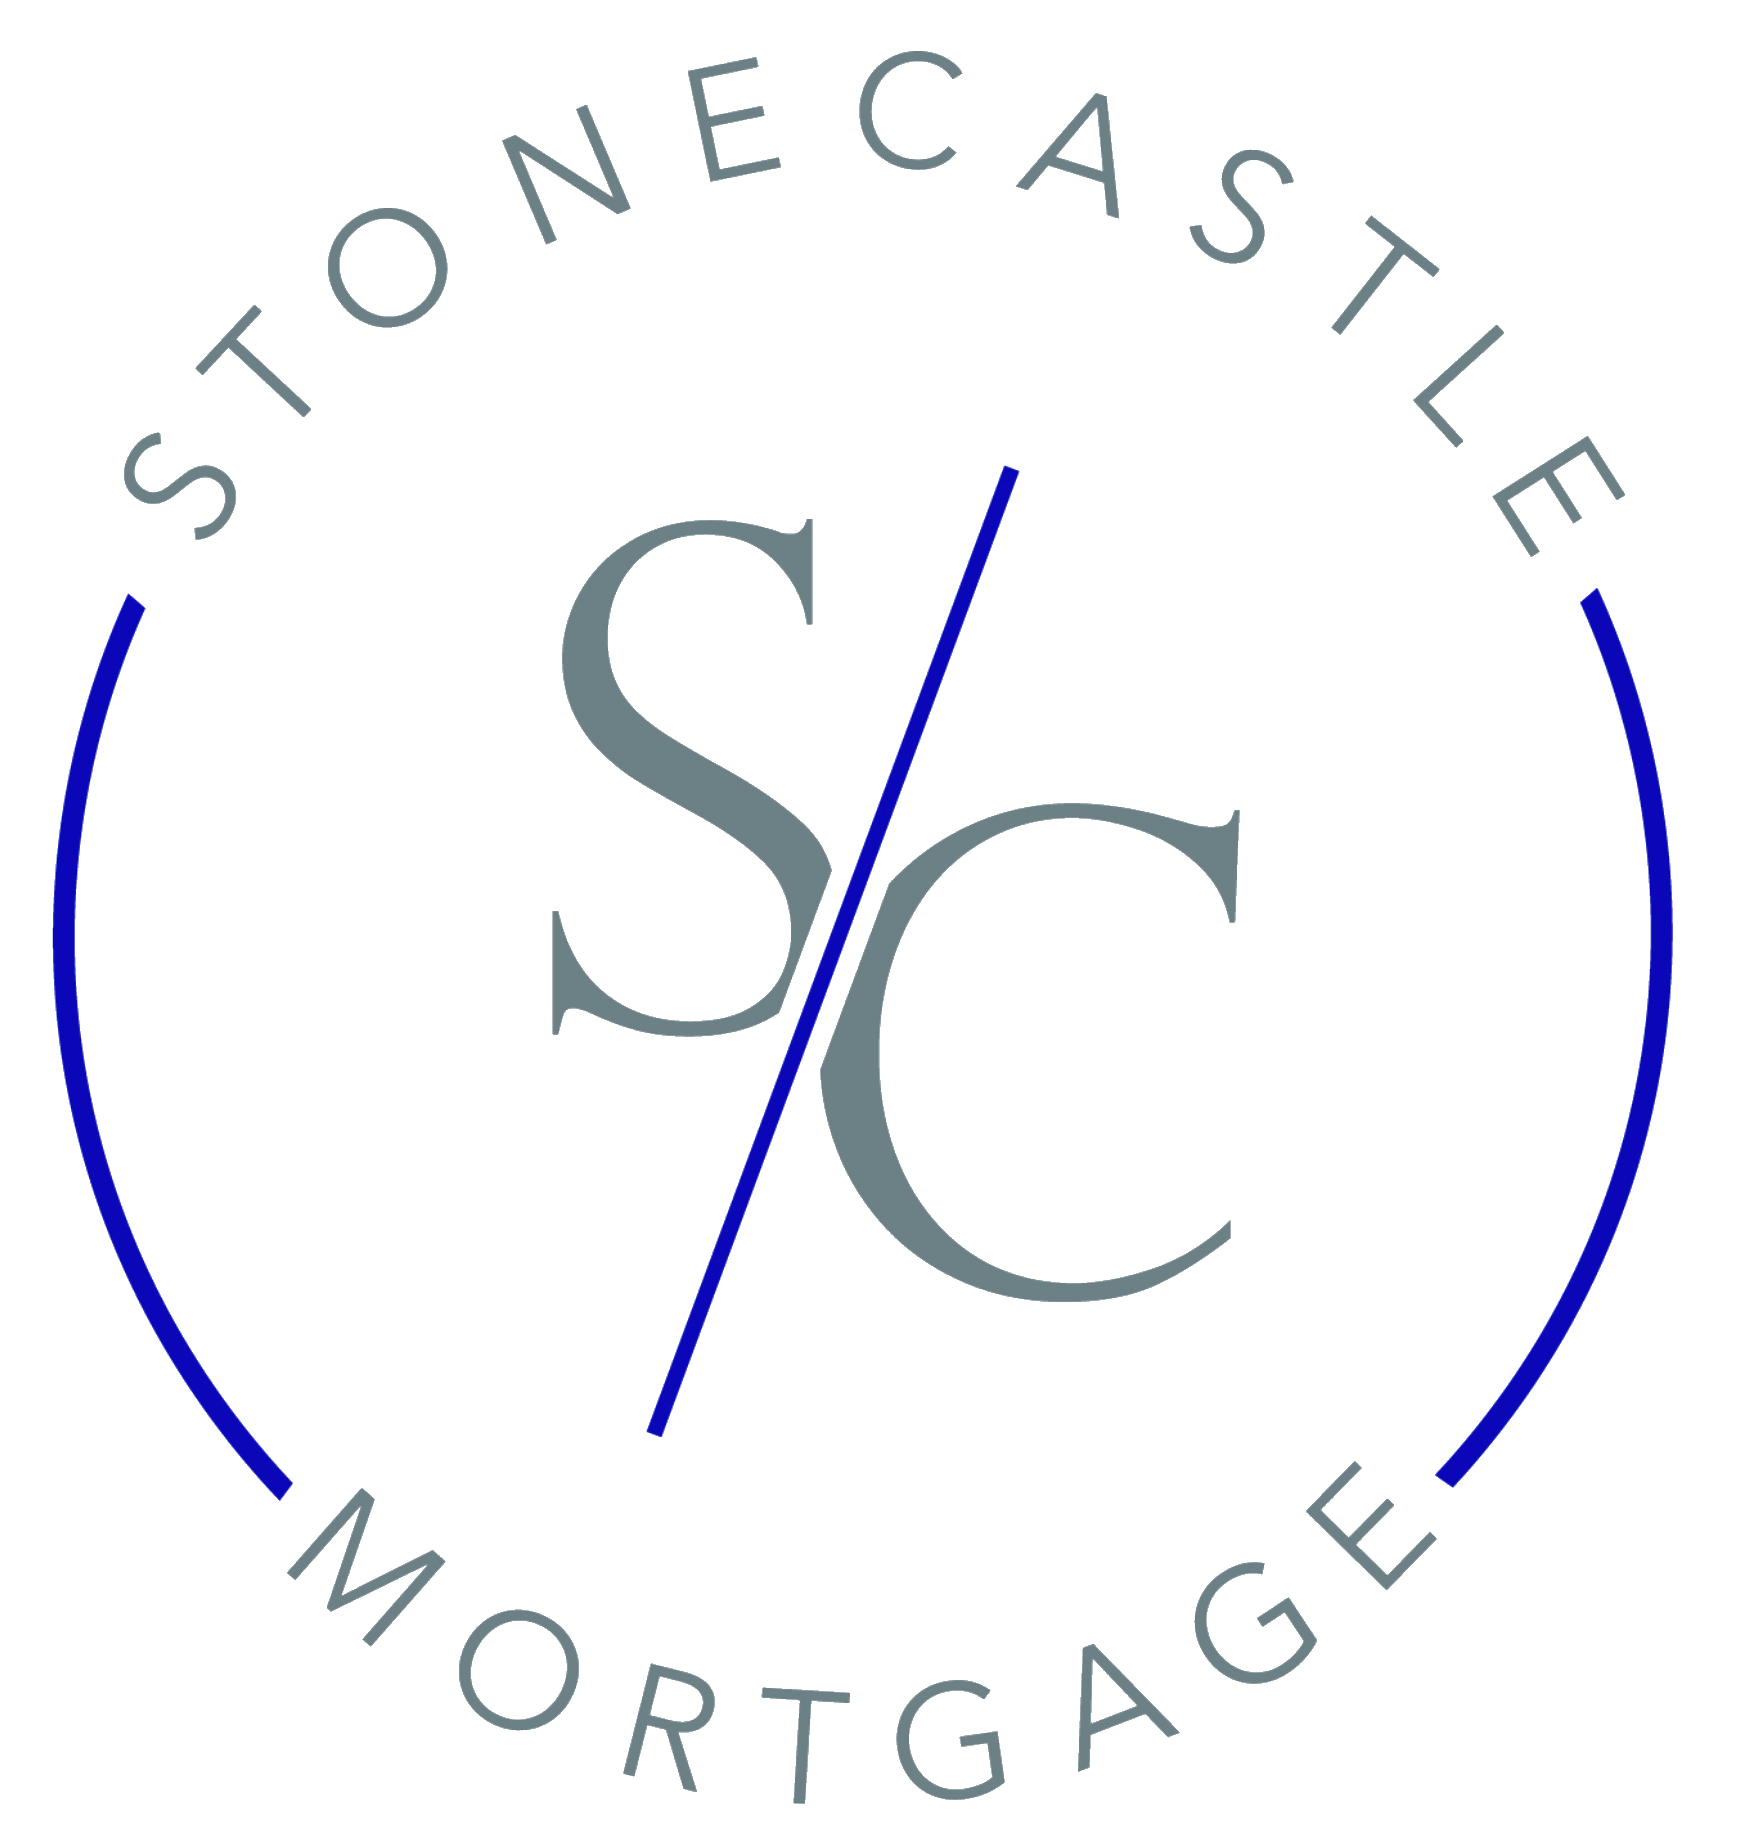 Stonecastle Land and Home Financial, Inc.